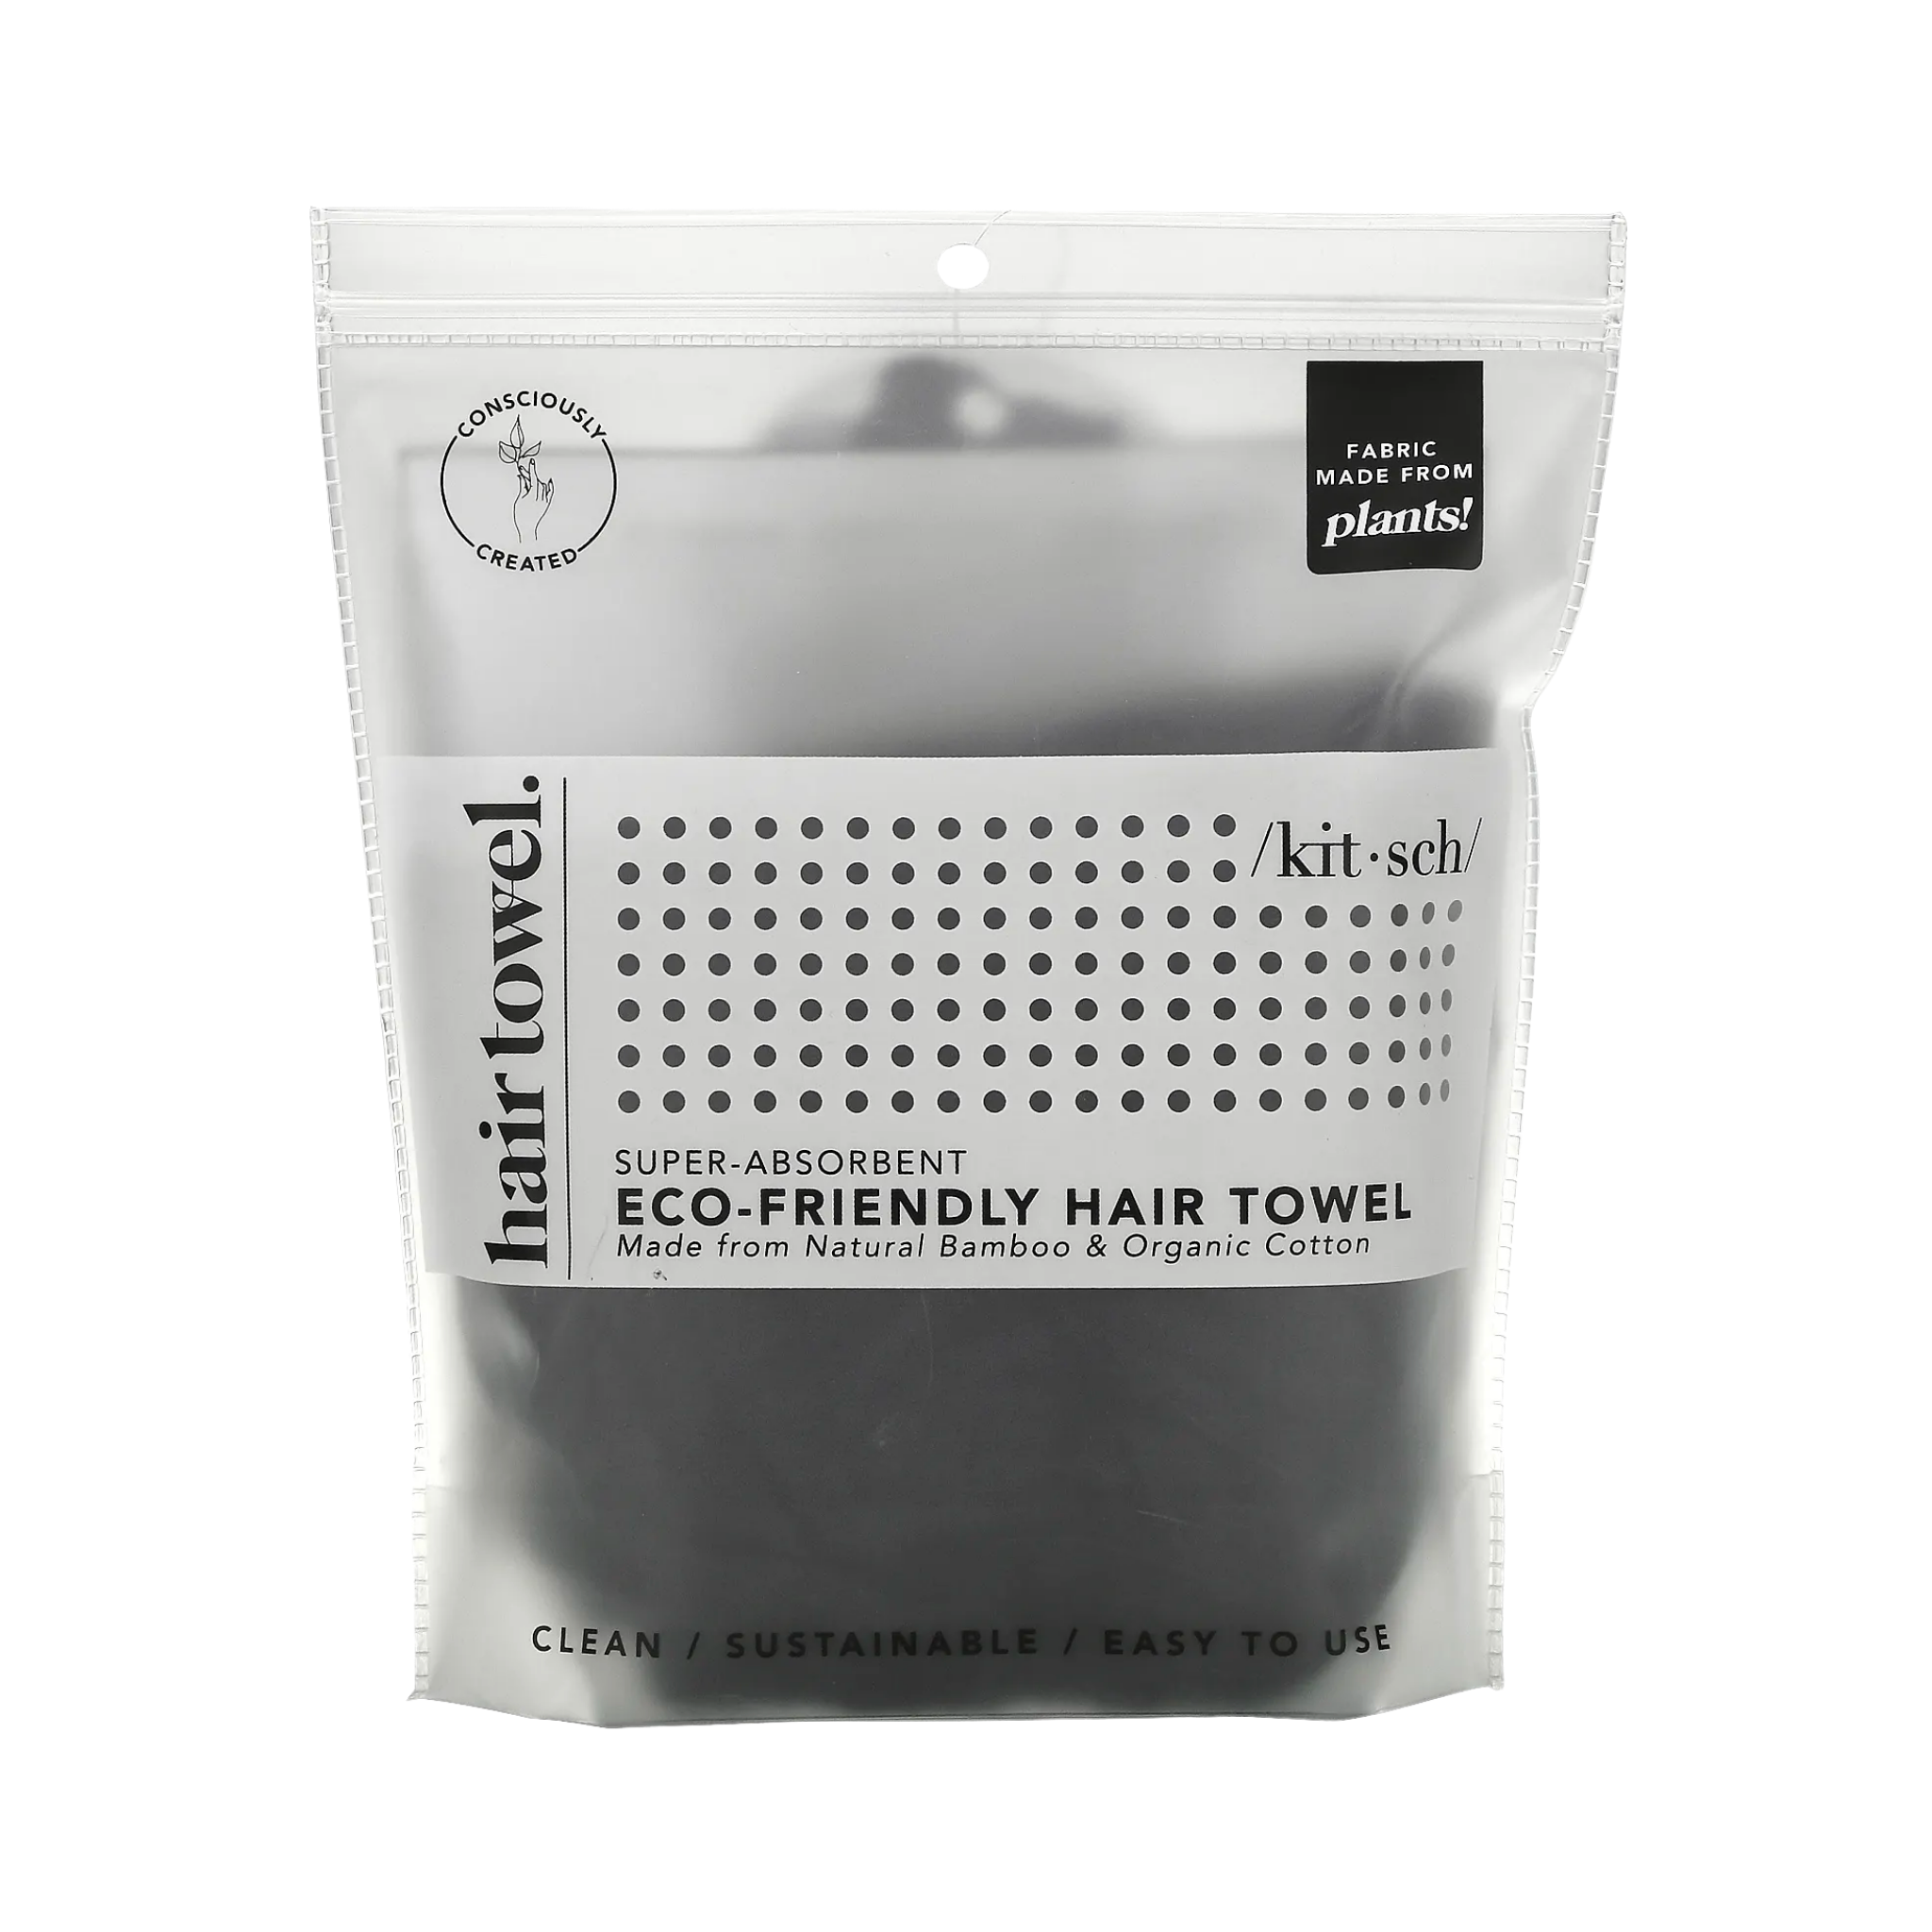 SUPER-ABSORBENT ECO-FRIENDLY HAIR TOWEL